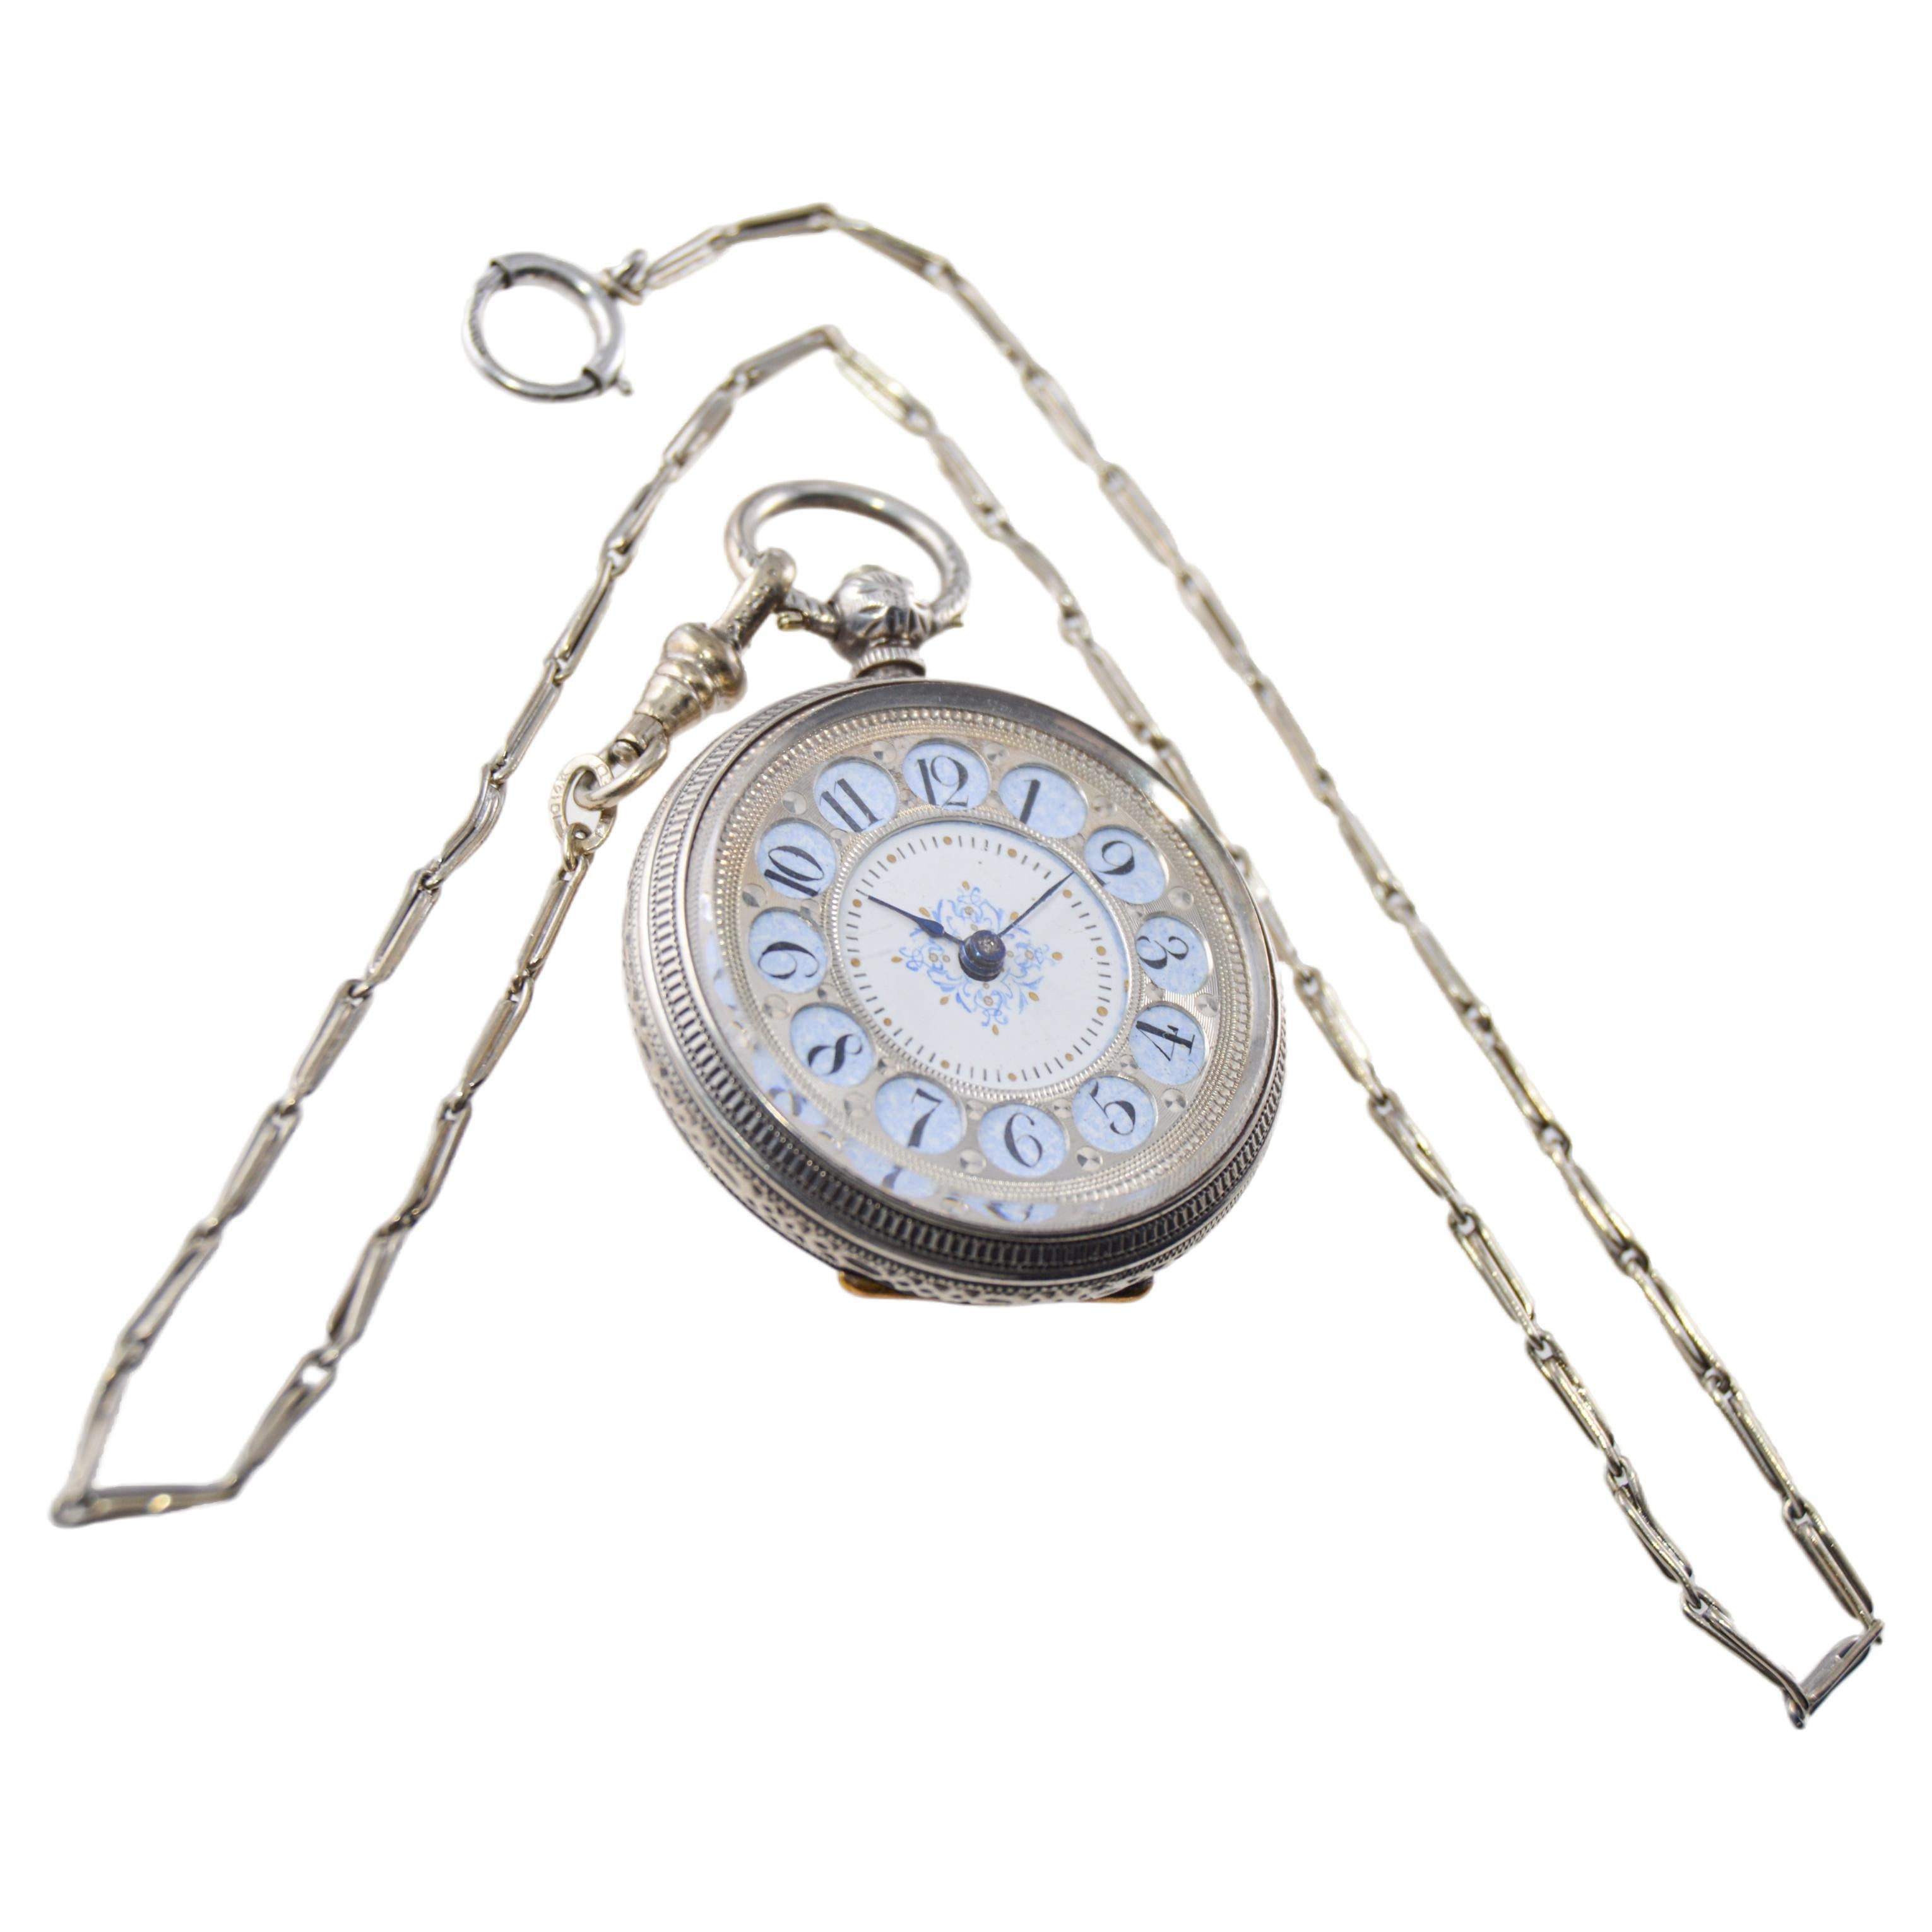 FACTORY / HOUSE: Pendant Style 
STYLE / REFERENCE: Open Faced Pendant Watch
METAL / MATERIAL: Sterling Silver
CIRCA / YEAR: 1880's
DIMENSIONS / SIZE: Diameter 34mm
MOVEMENT / CALIBER: Key Wind / 13 Jewels / Cylindrical Escapement
DIAL / HANDS: